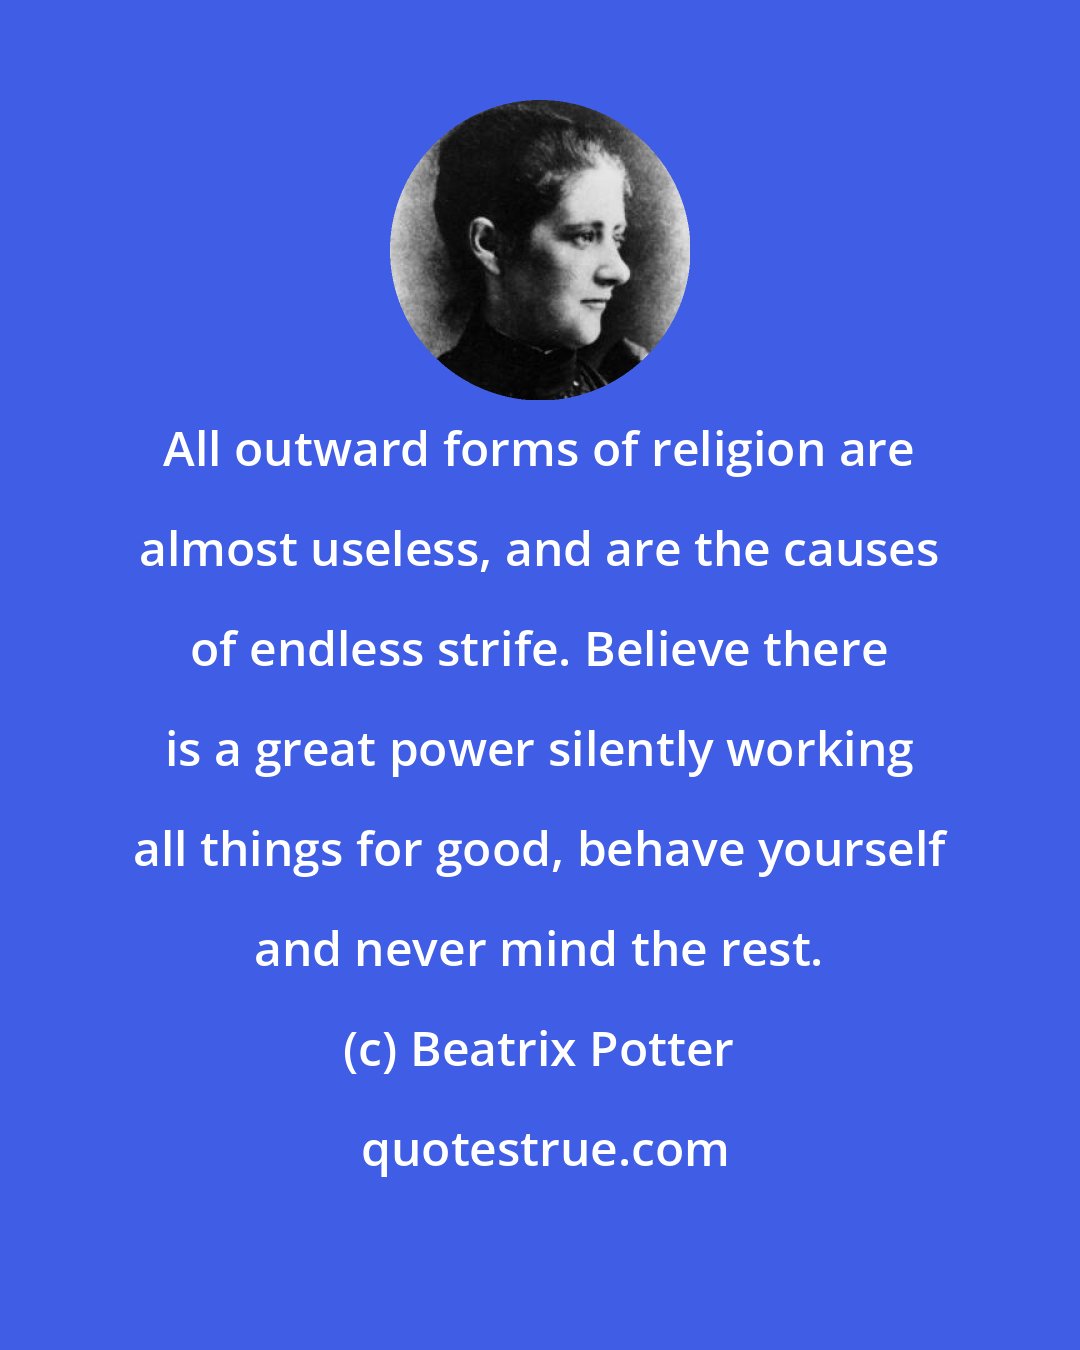 Beatrix Potter: All outward forms of religion are almost useless, and are the causes of endless strife. Believe there is a great power silently working all things for good, behave yourself and never mind the rest.